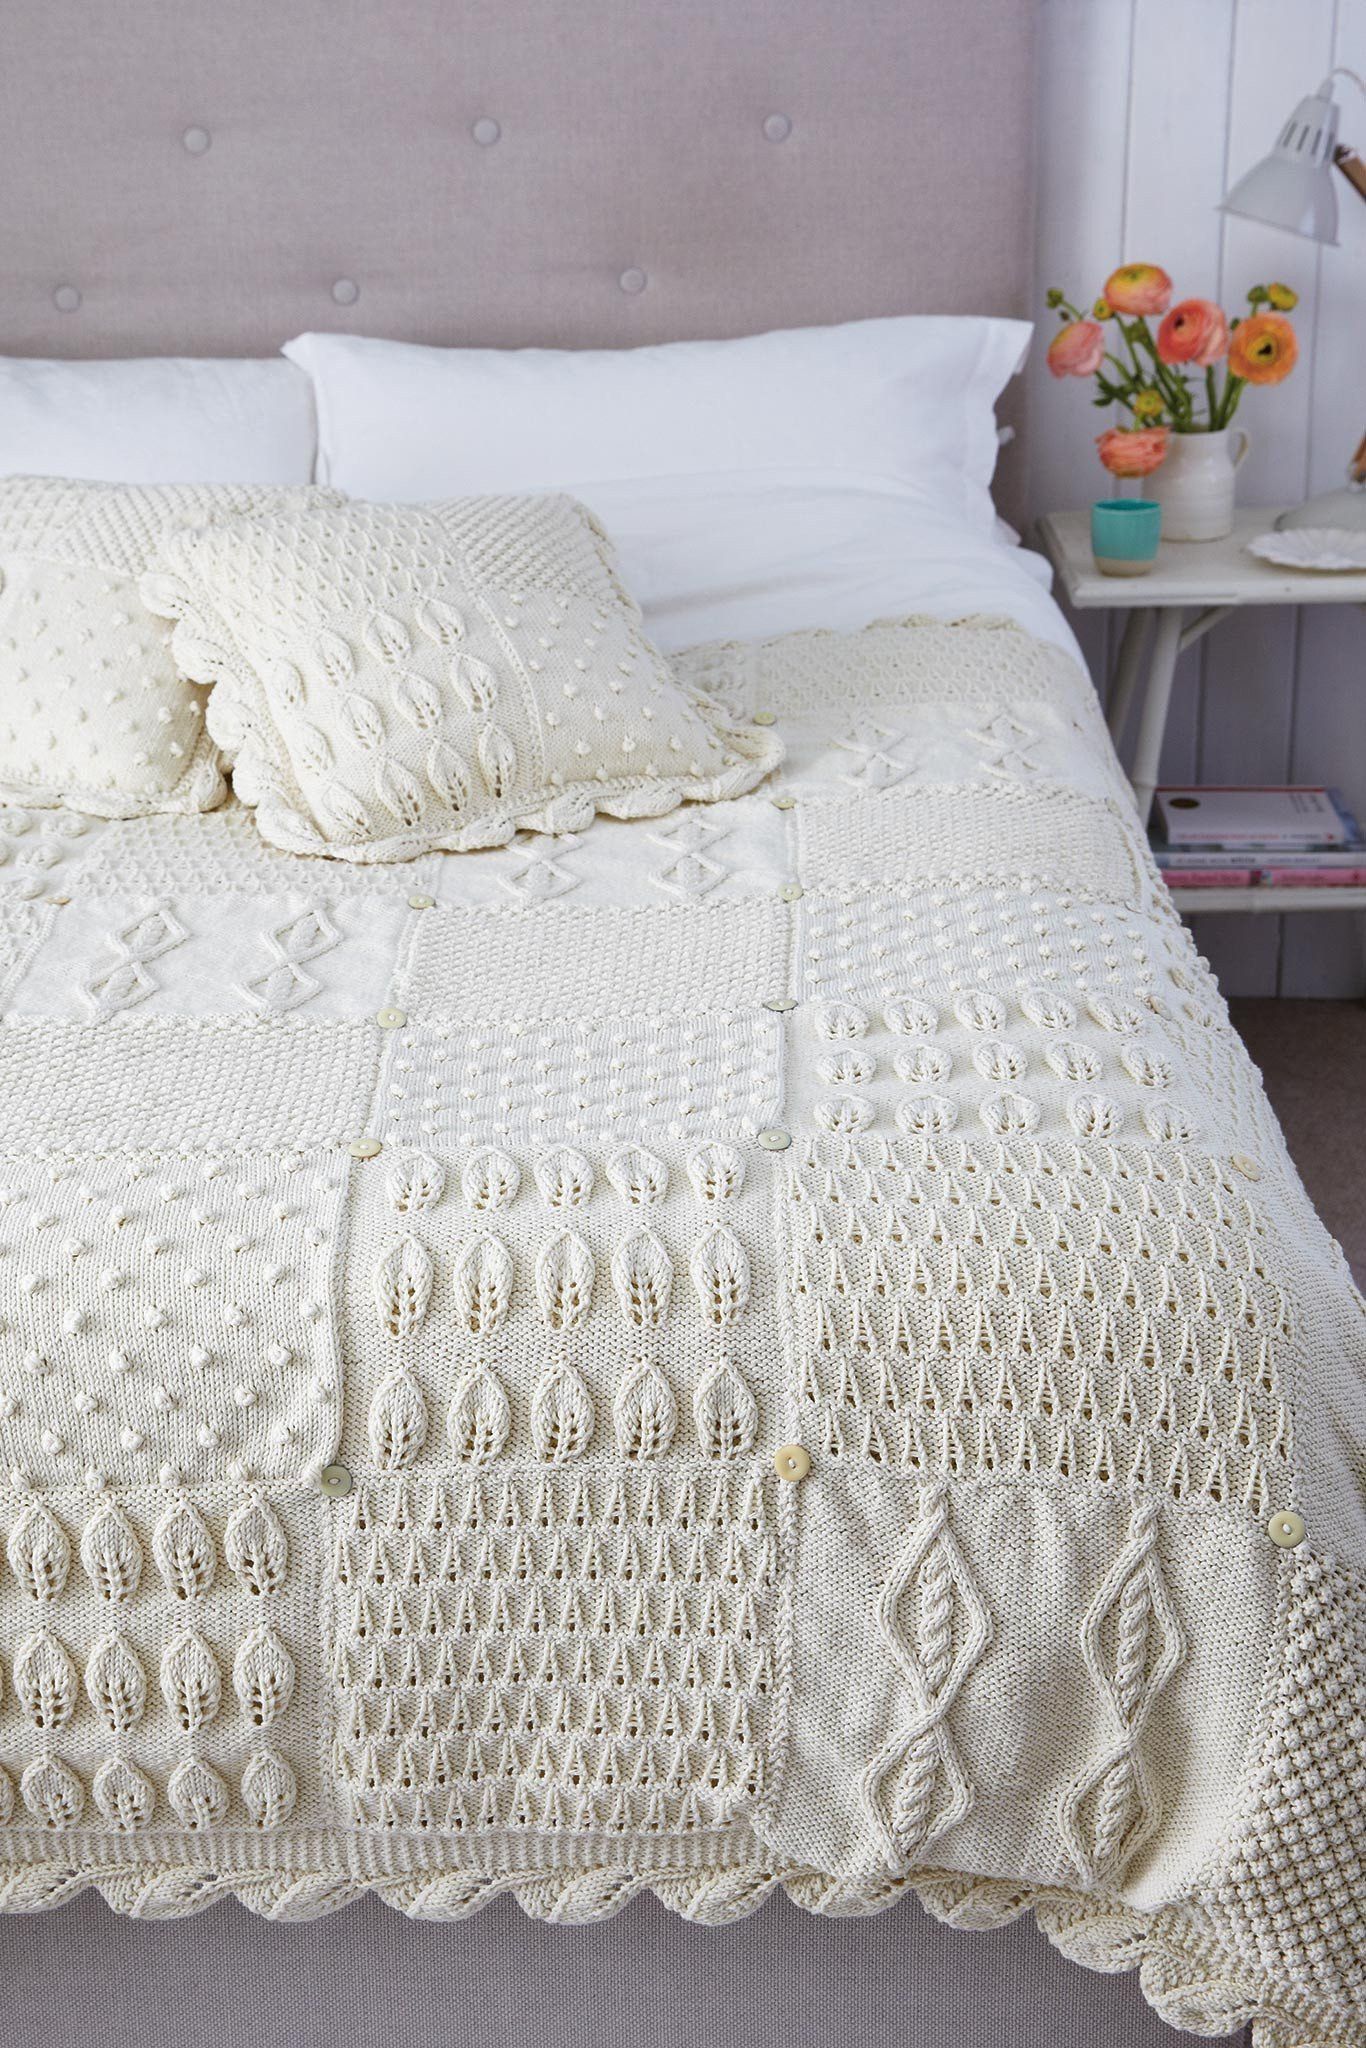 Free for a Limited Time Knitting Pattern Bed Topper And Cushion Knitting Patterns